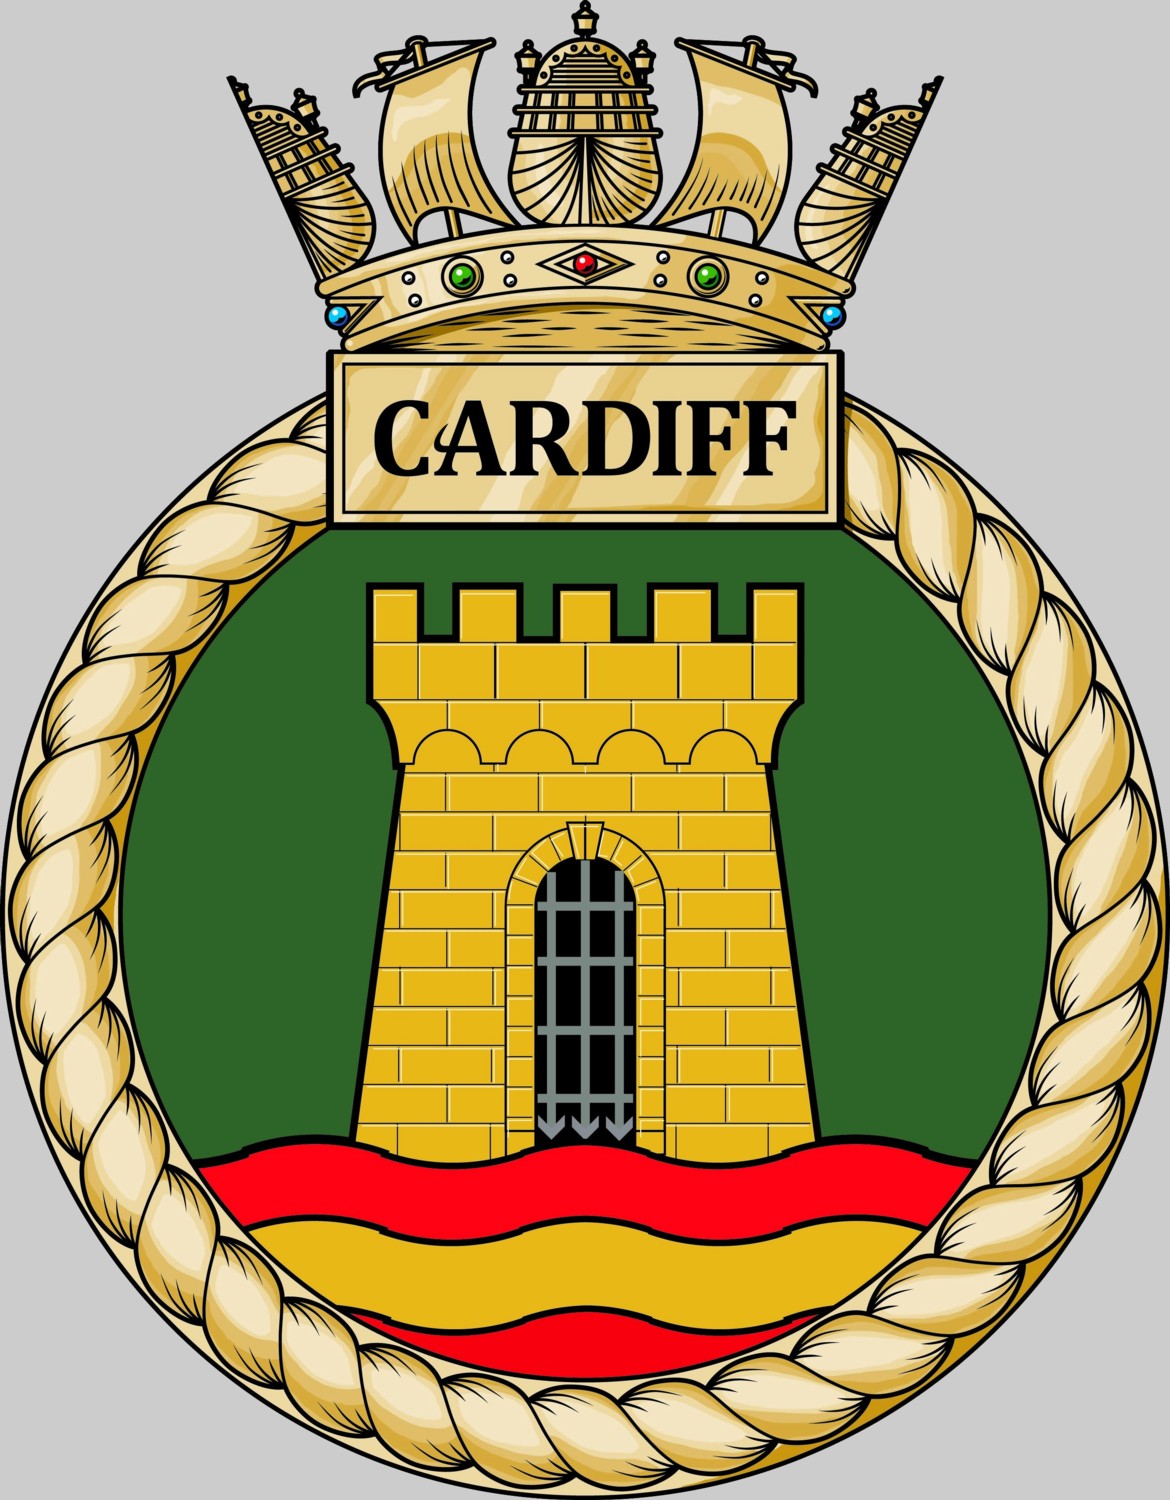 f-89 hms cardiff insignia crest patch badge type 26 city class frigate global combat ship royal navy 02c